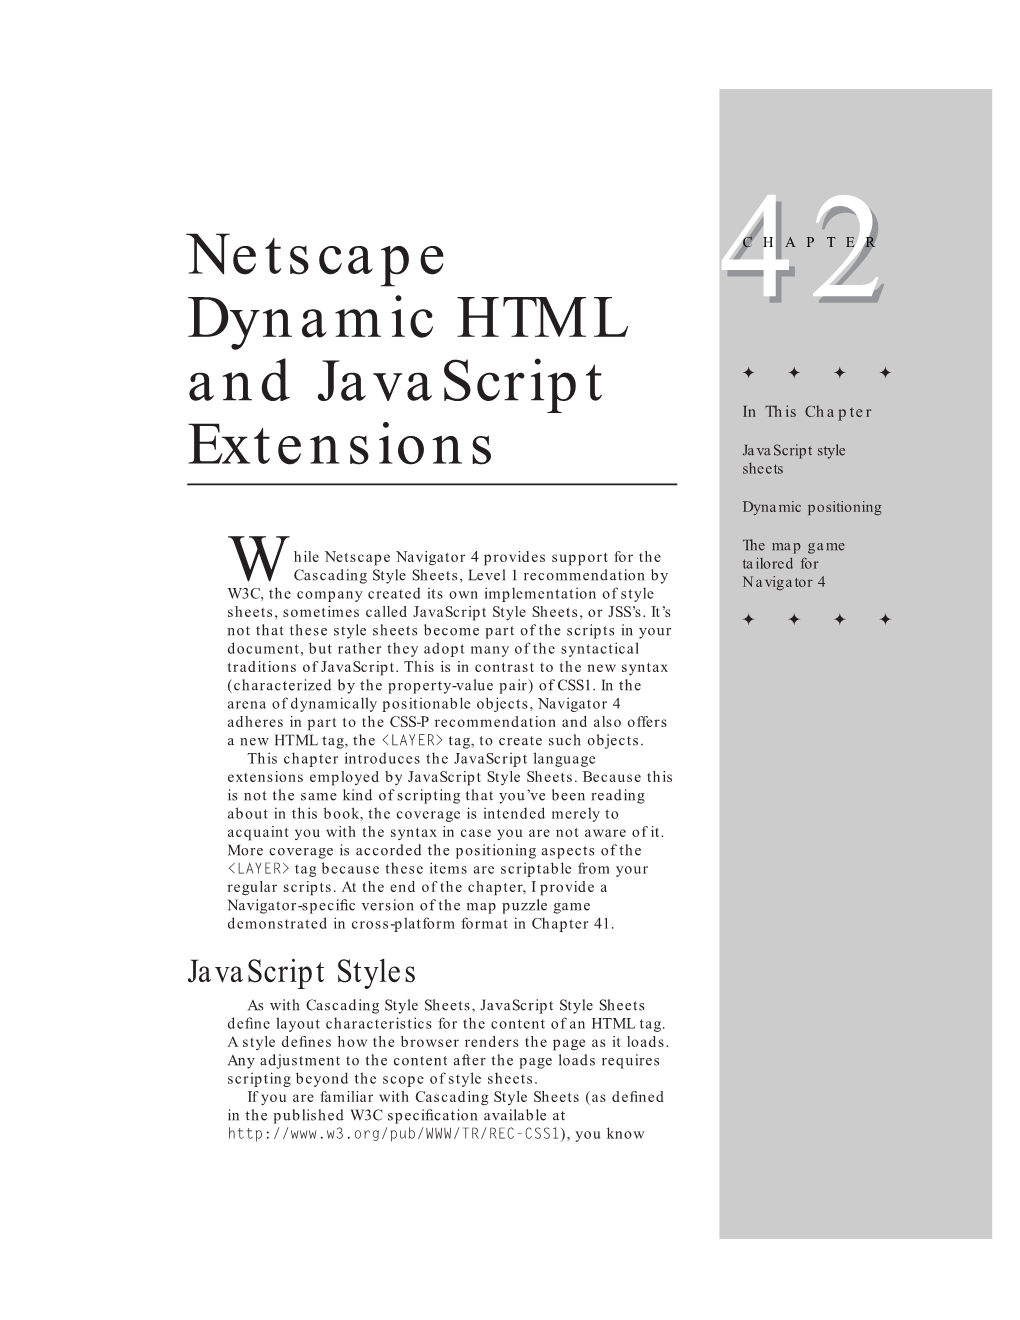 Netscape Dynamic HTML and Javascript Extensions 877